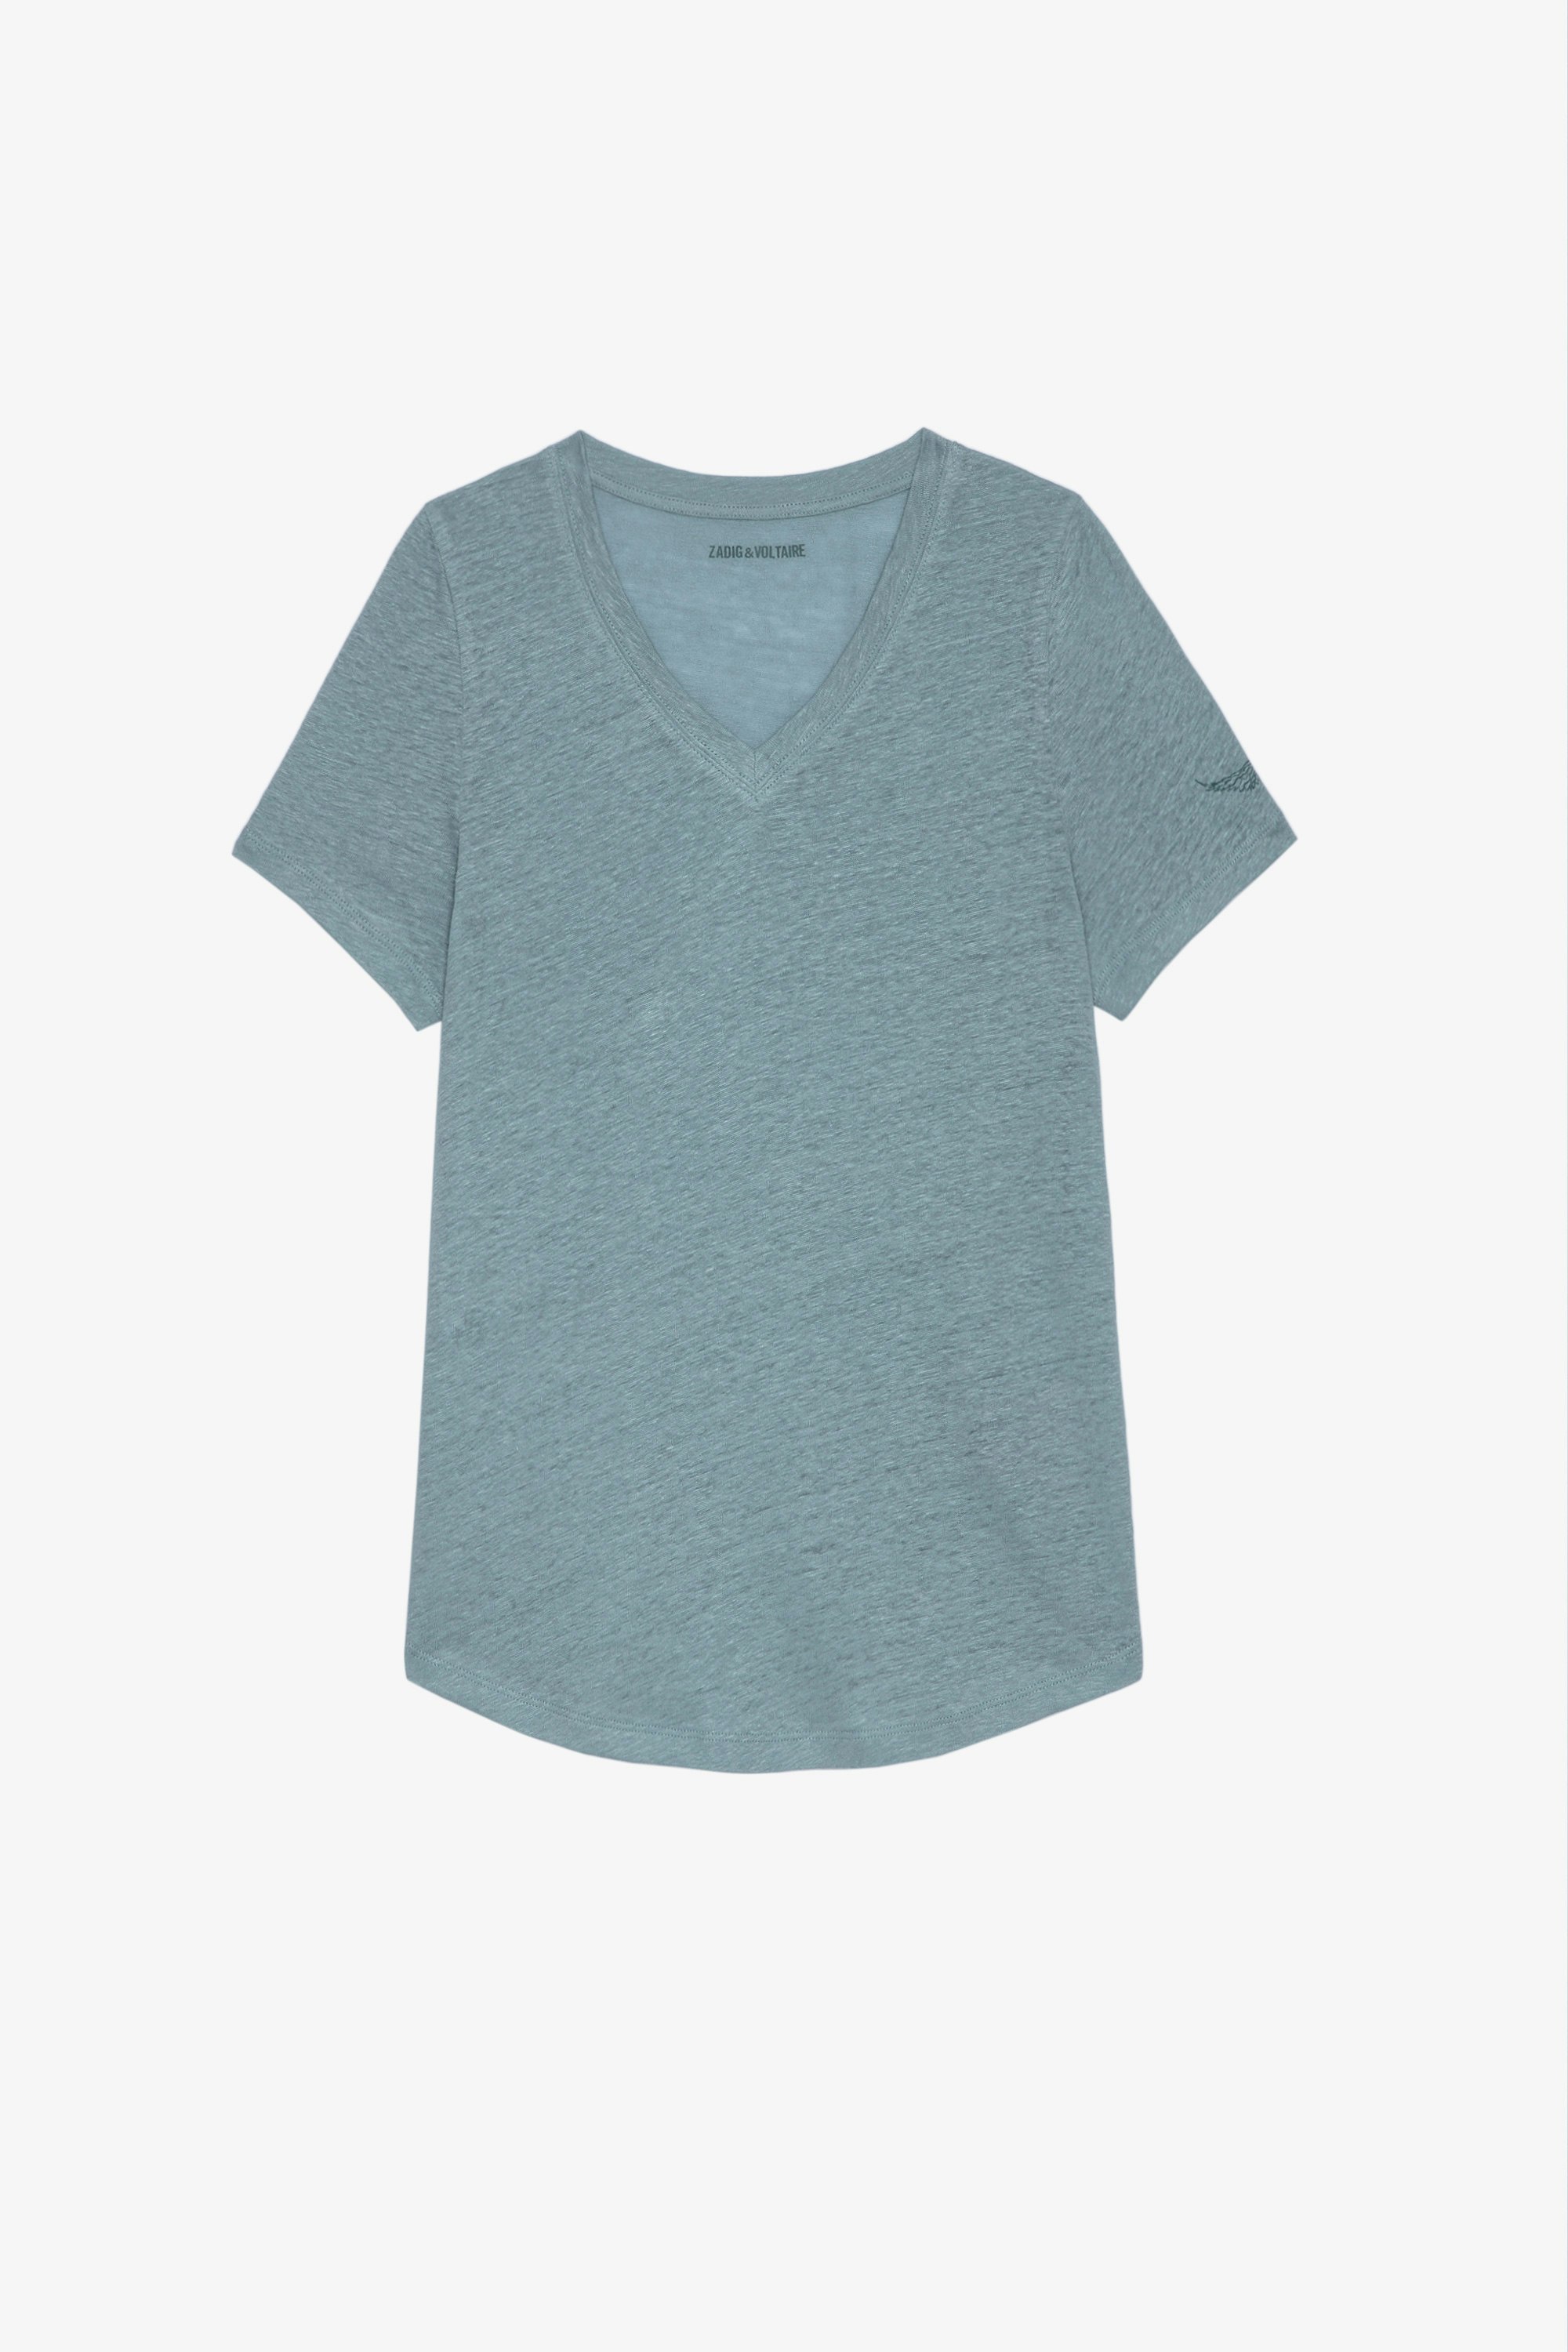 Atia Wings Linen T-Shirt Women’s light blue cotton T-shirt with V neckline and long sleeves